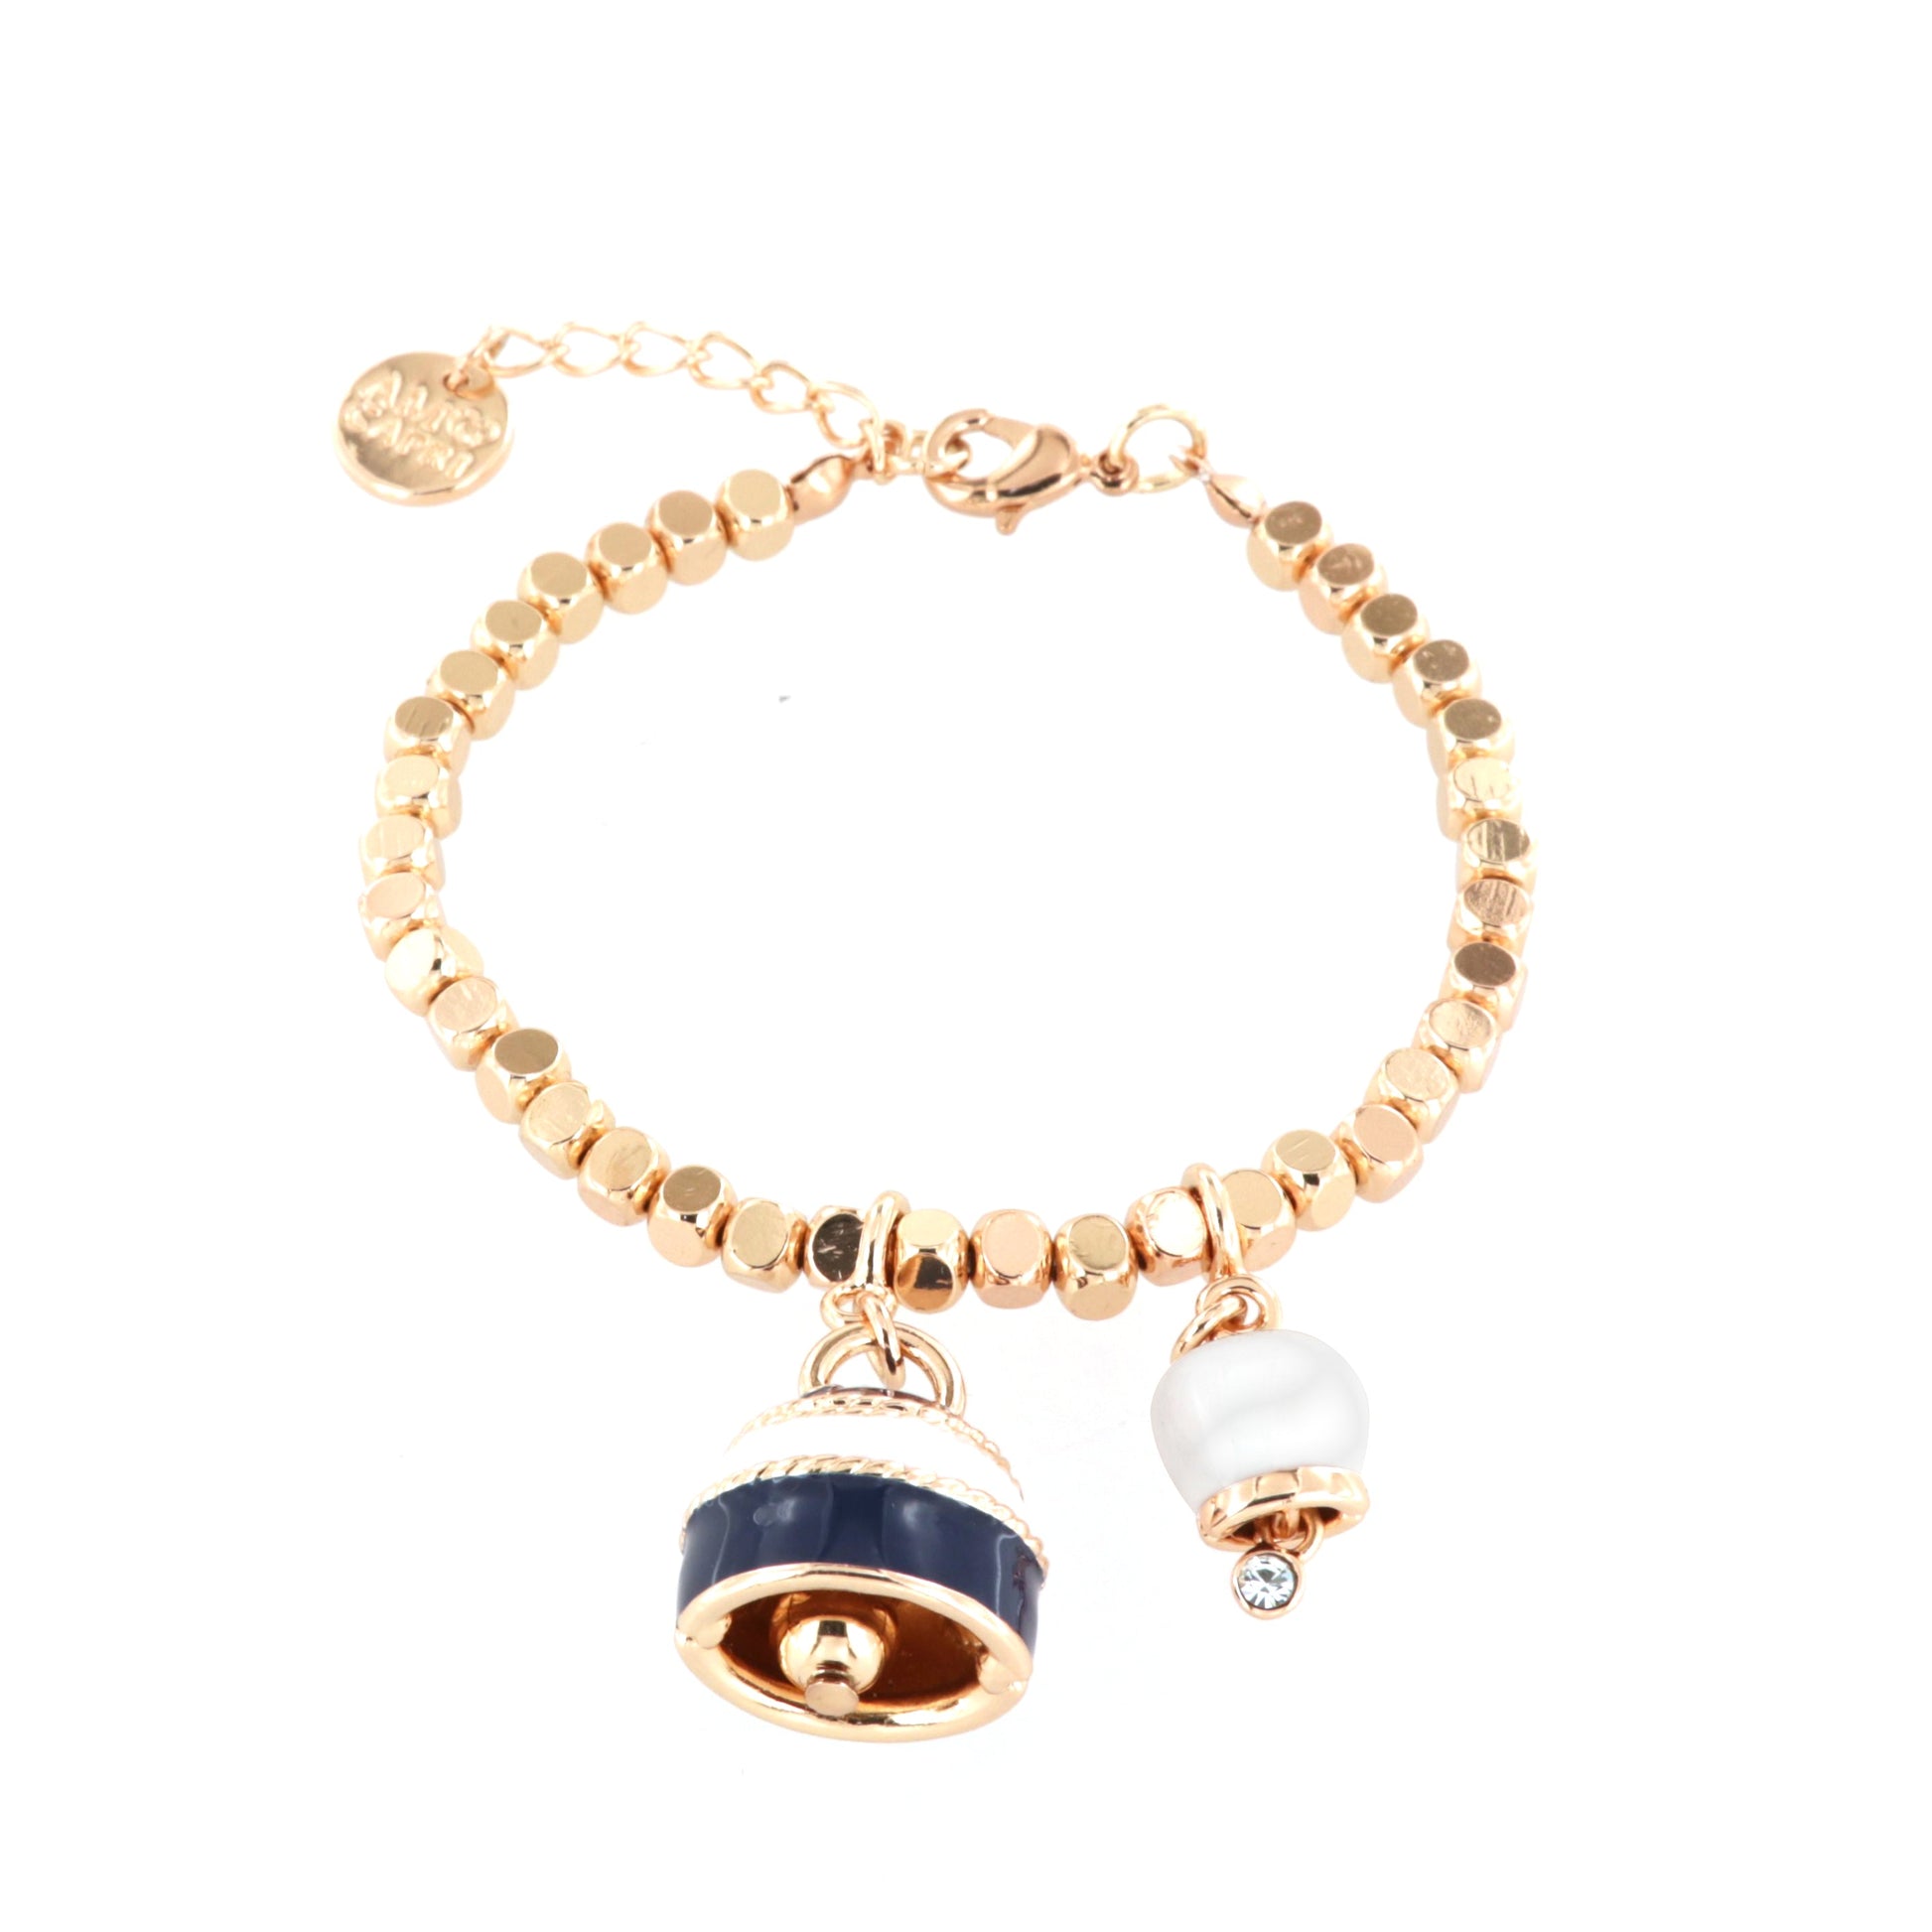 Metal bracelet with double pendant bell embellished with white, blue and crystals enamels